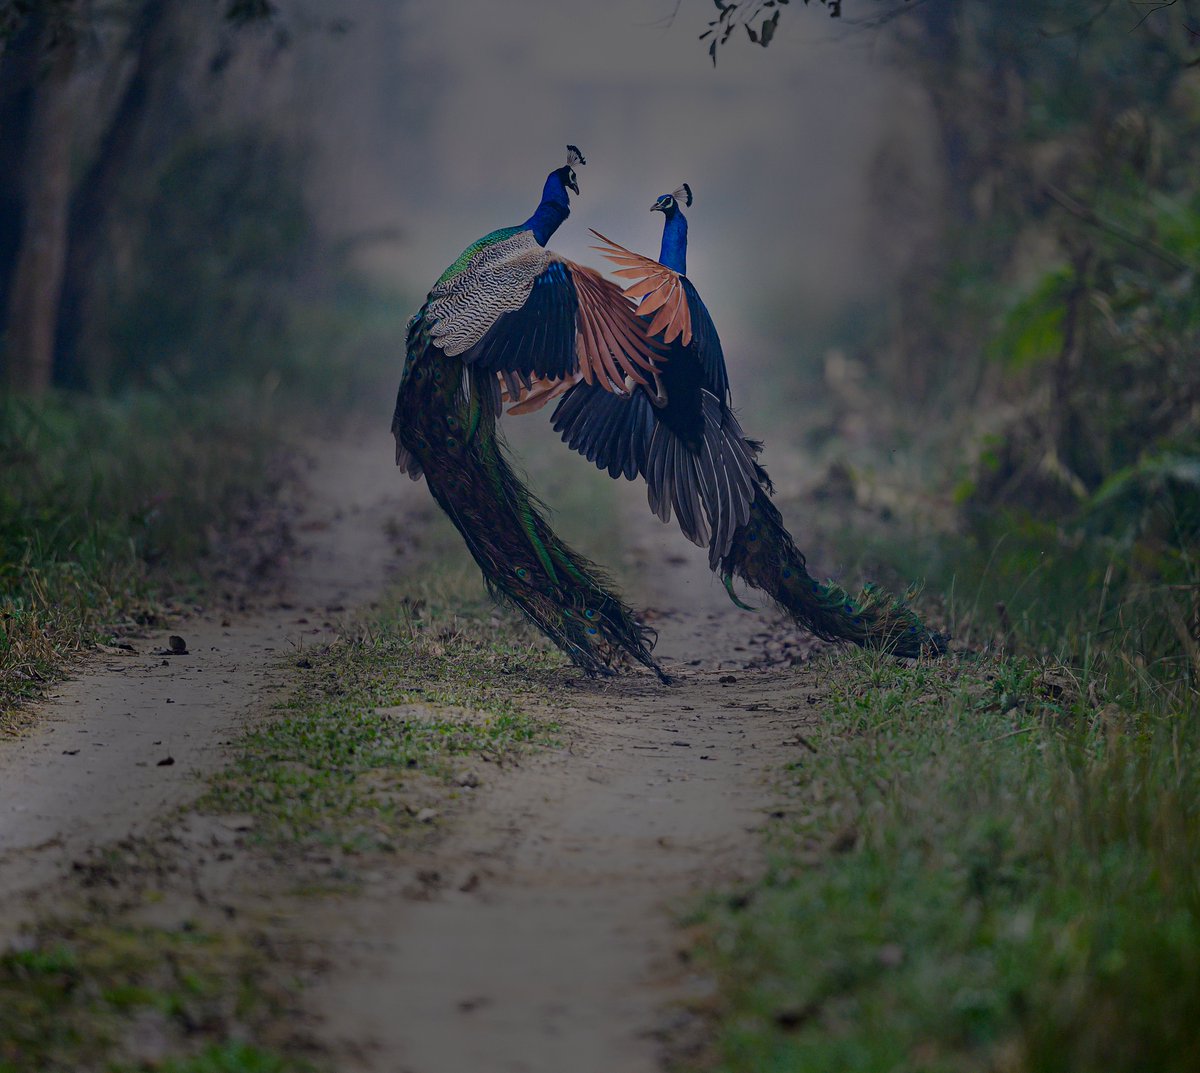  #National  #Birds on an adventure. Beauty. Isn't it. Clicked by Nilesh Patel.